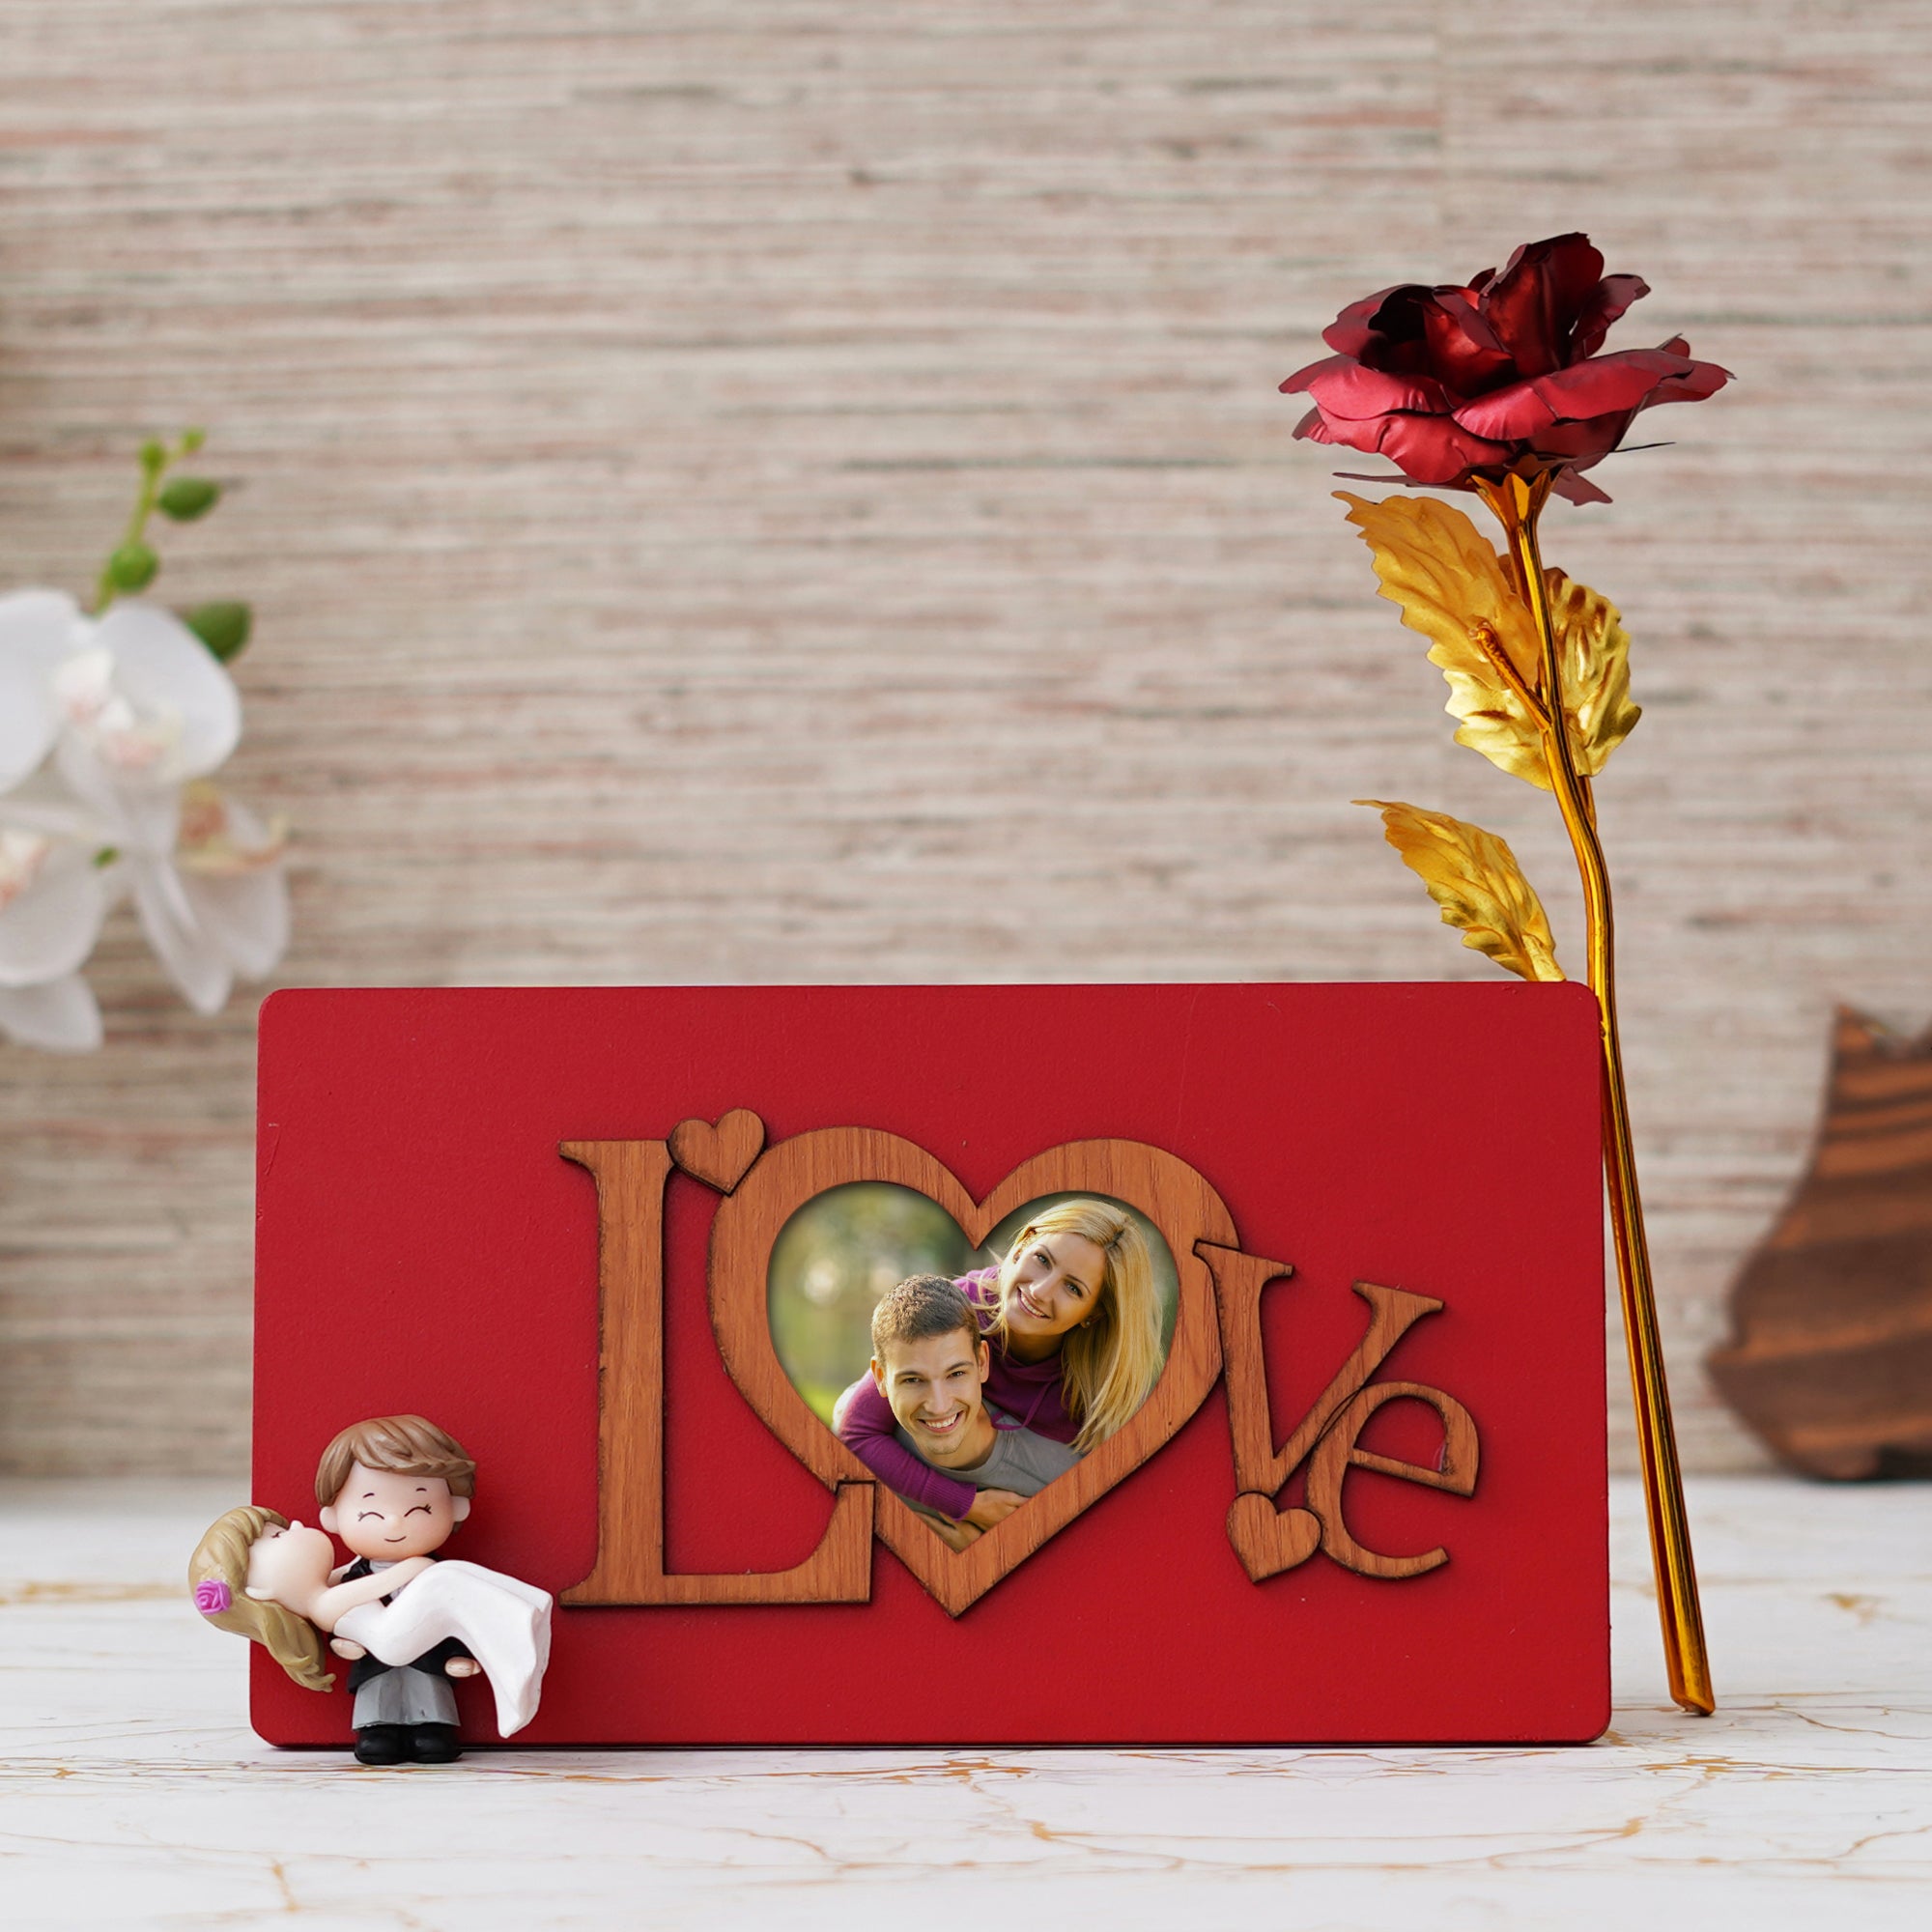 Valentine Combo of Golden Red Rose Gift Set, "Love" Wooden Photo Frame With Red Stand, Bride Kissing Groom Romantic Polyresin Decorative Showpiece